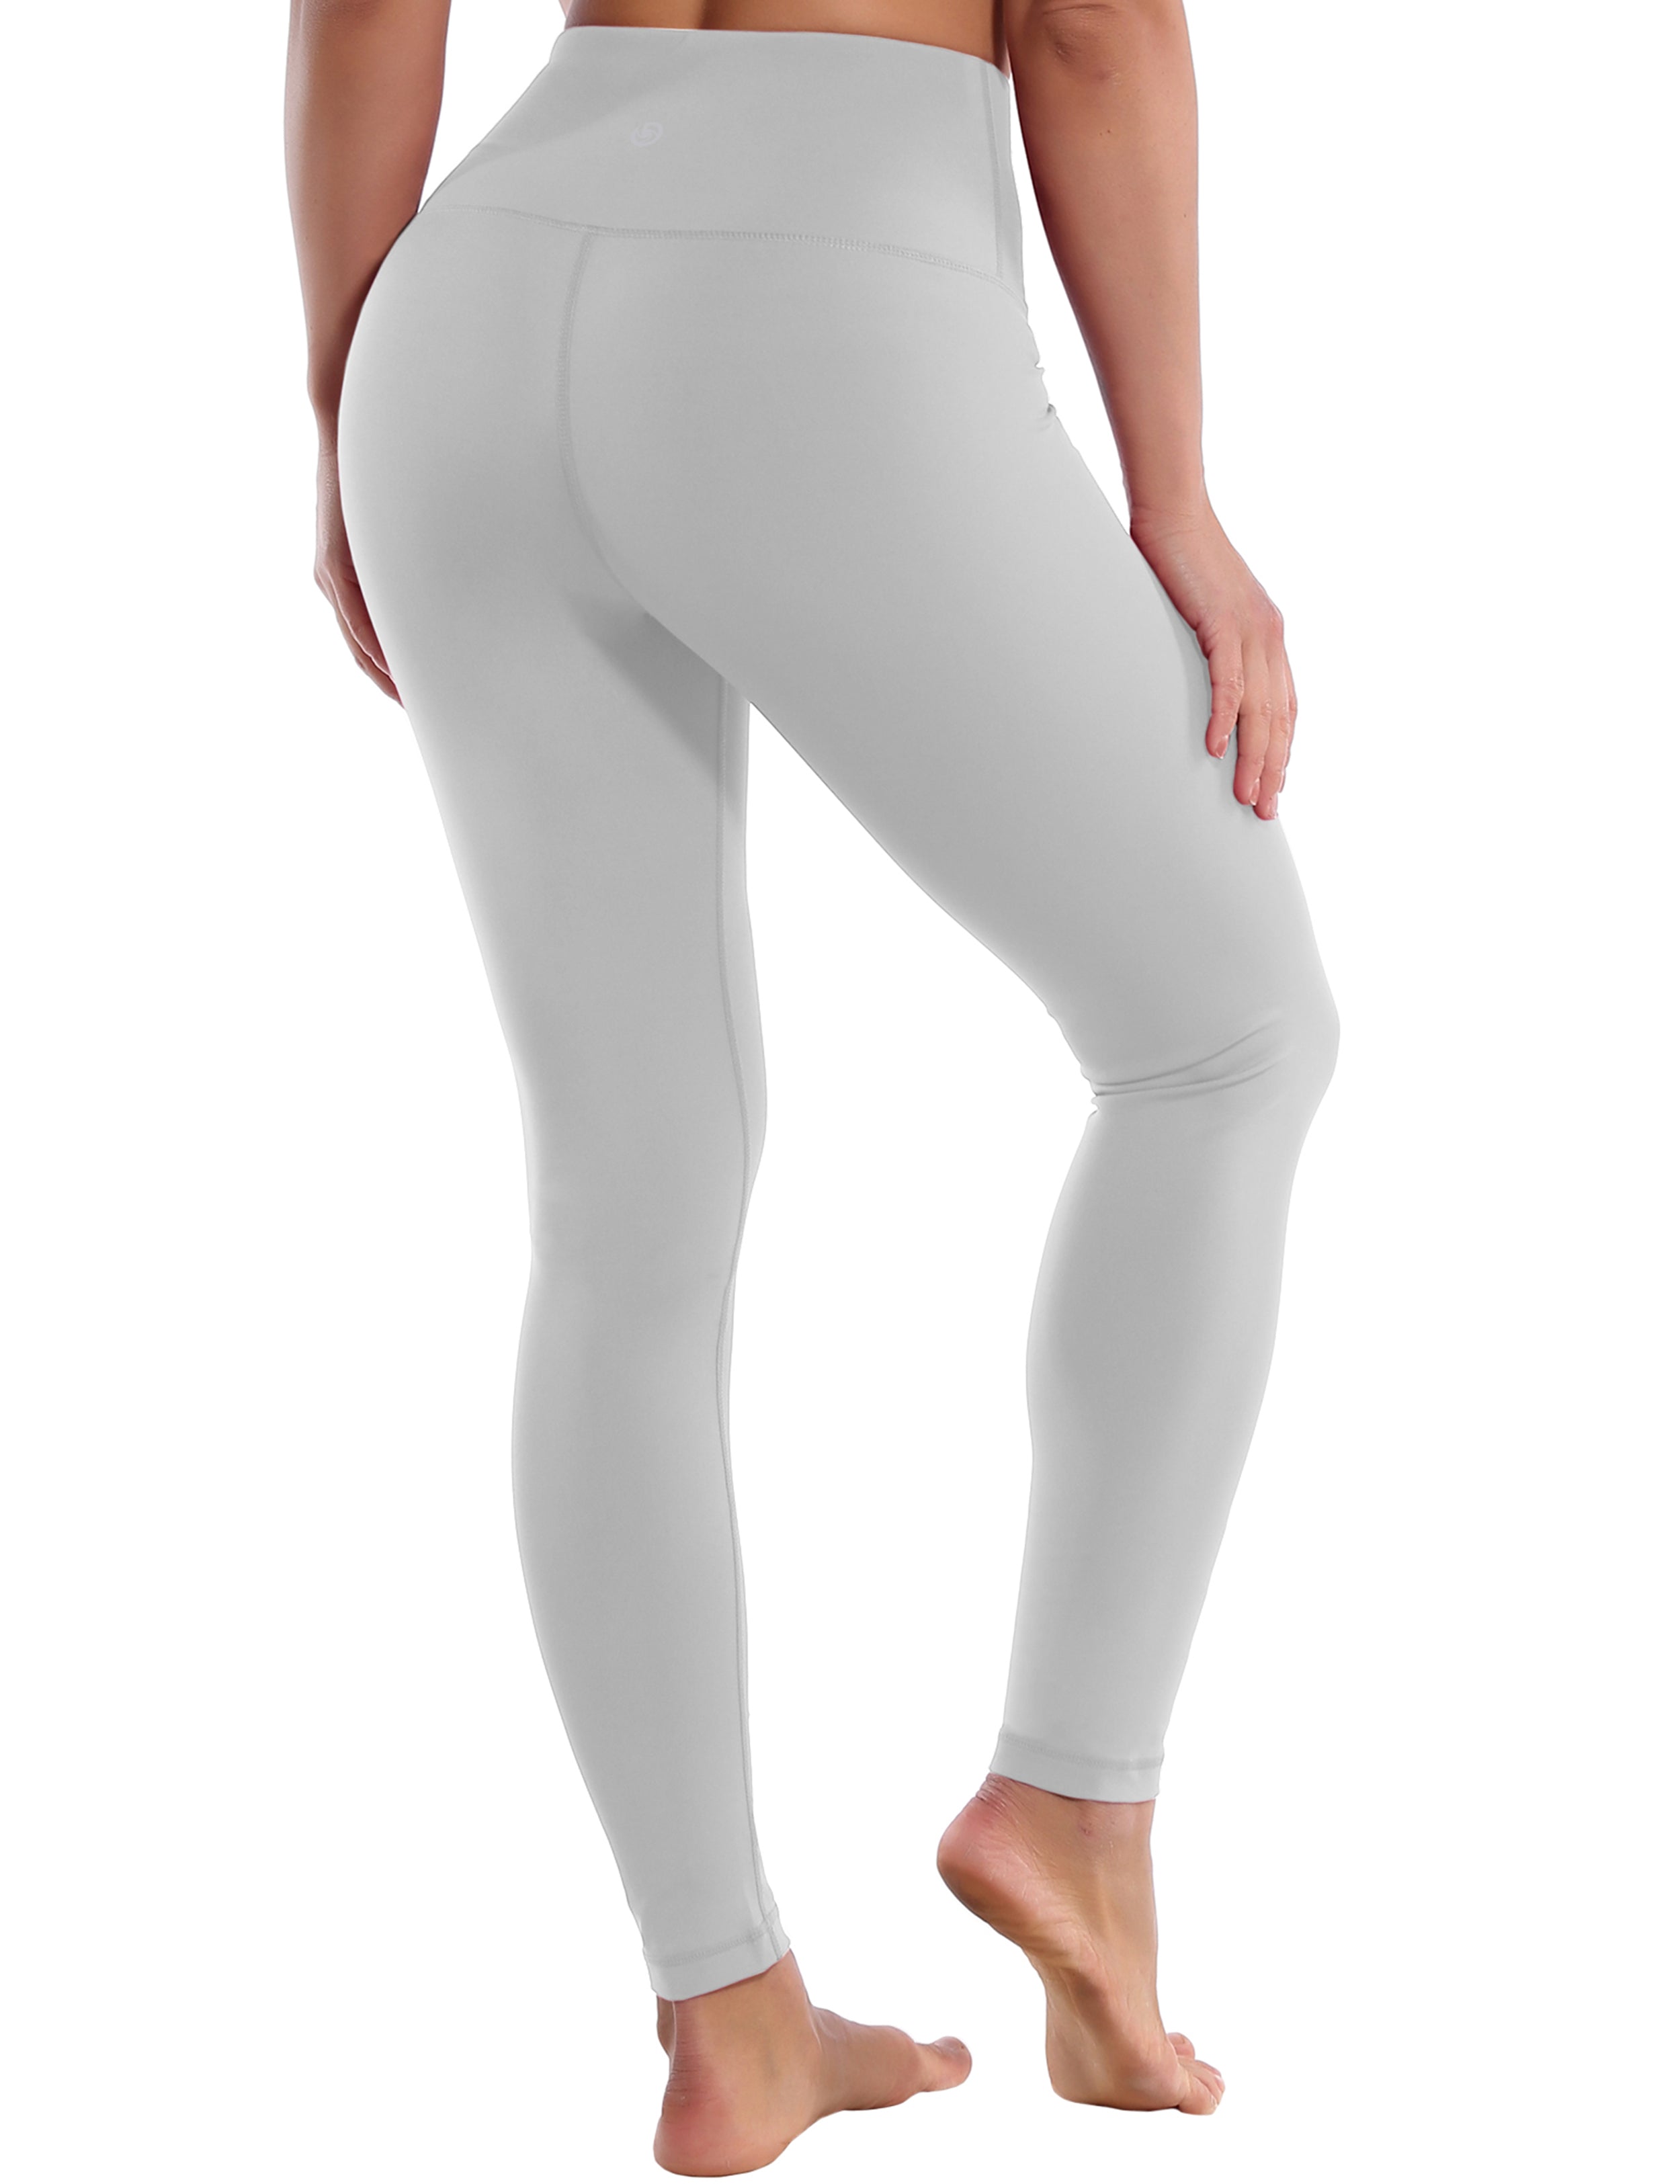 High Waist yogastudio Pants lightgray 75%Nylon/25%Spandex Fabric doesn't attract lint easily 4-way stretch No see-through Moisture-wicking Tummy control Inner pocket Four lengths